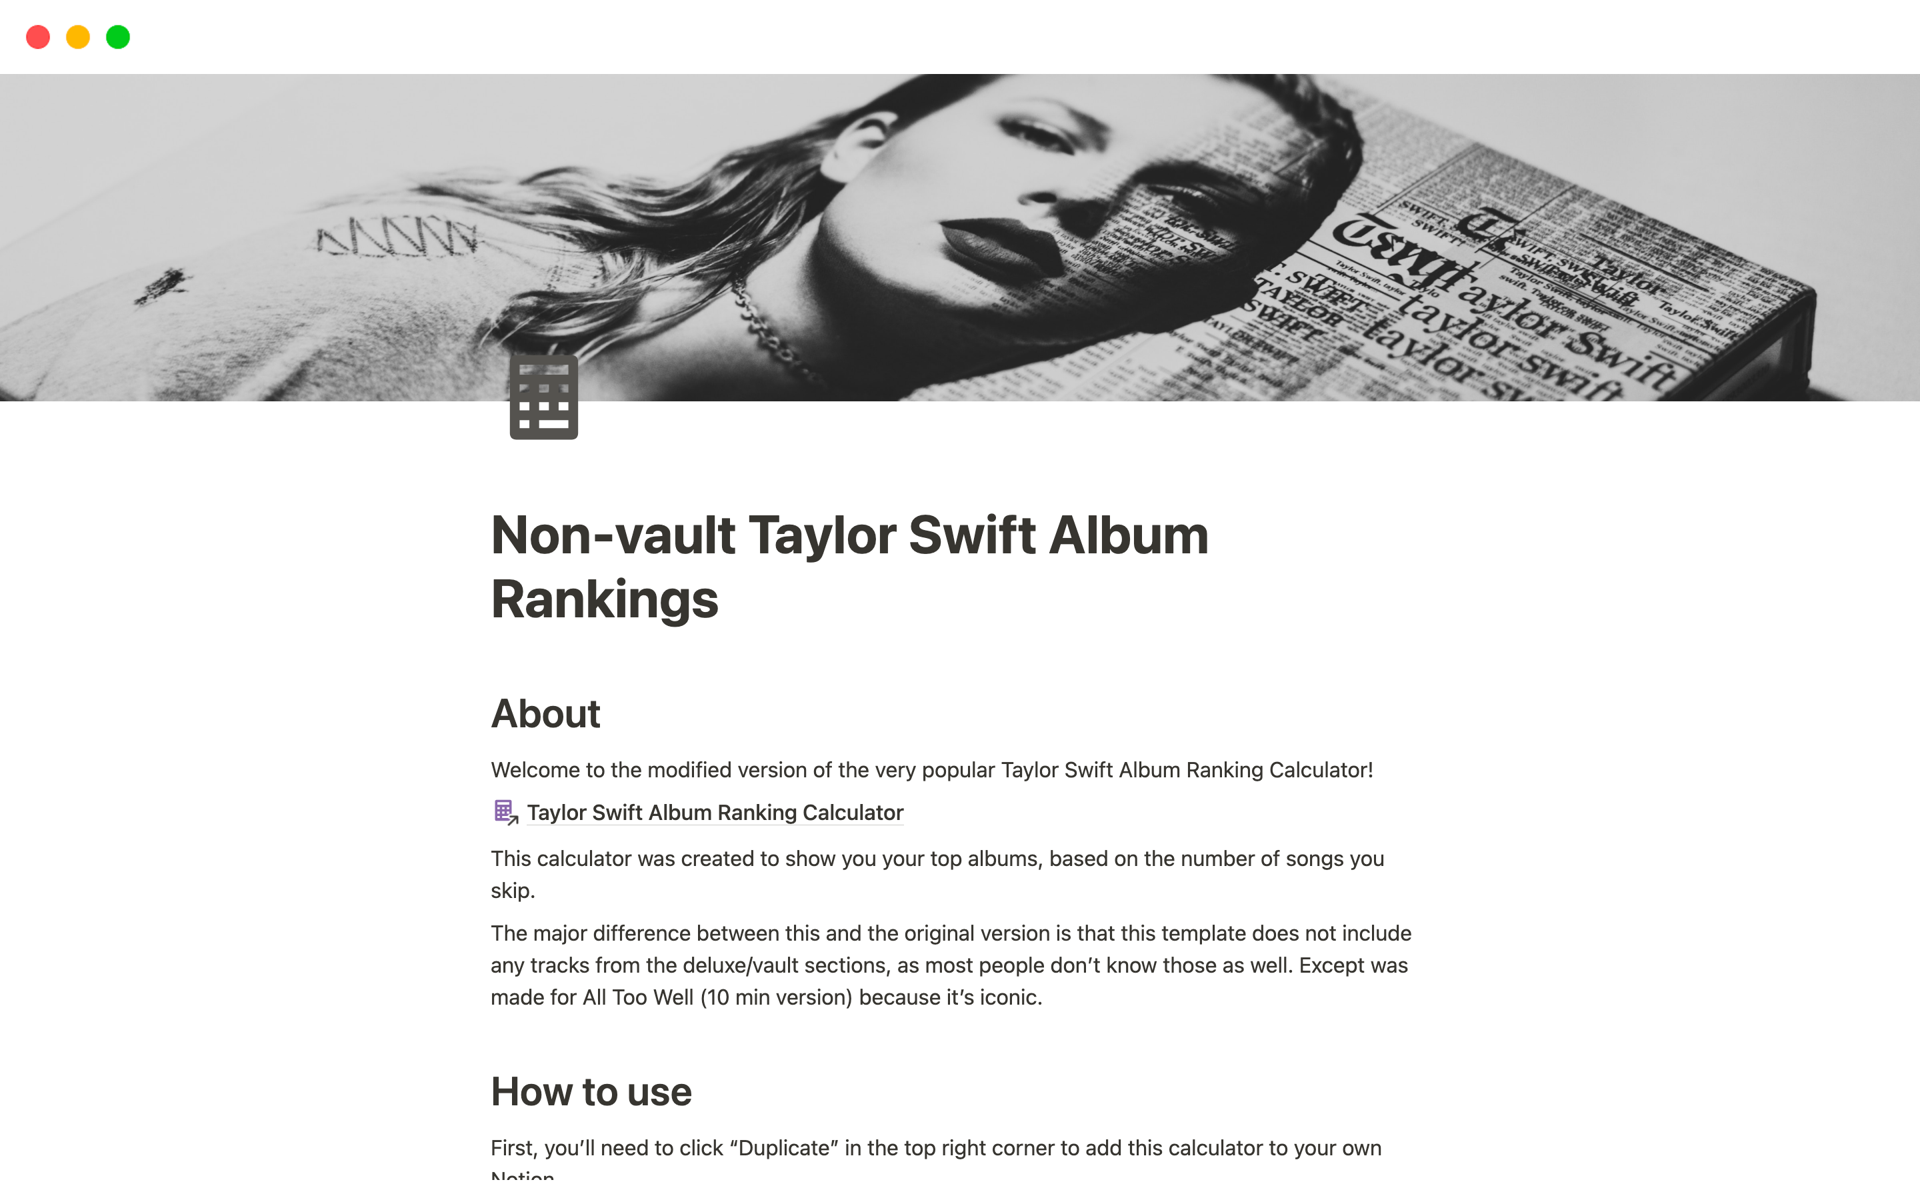 Help you figure out your official Taylor Swift album ranking